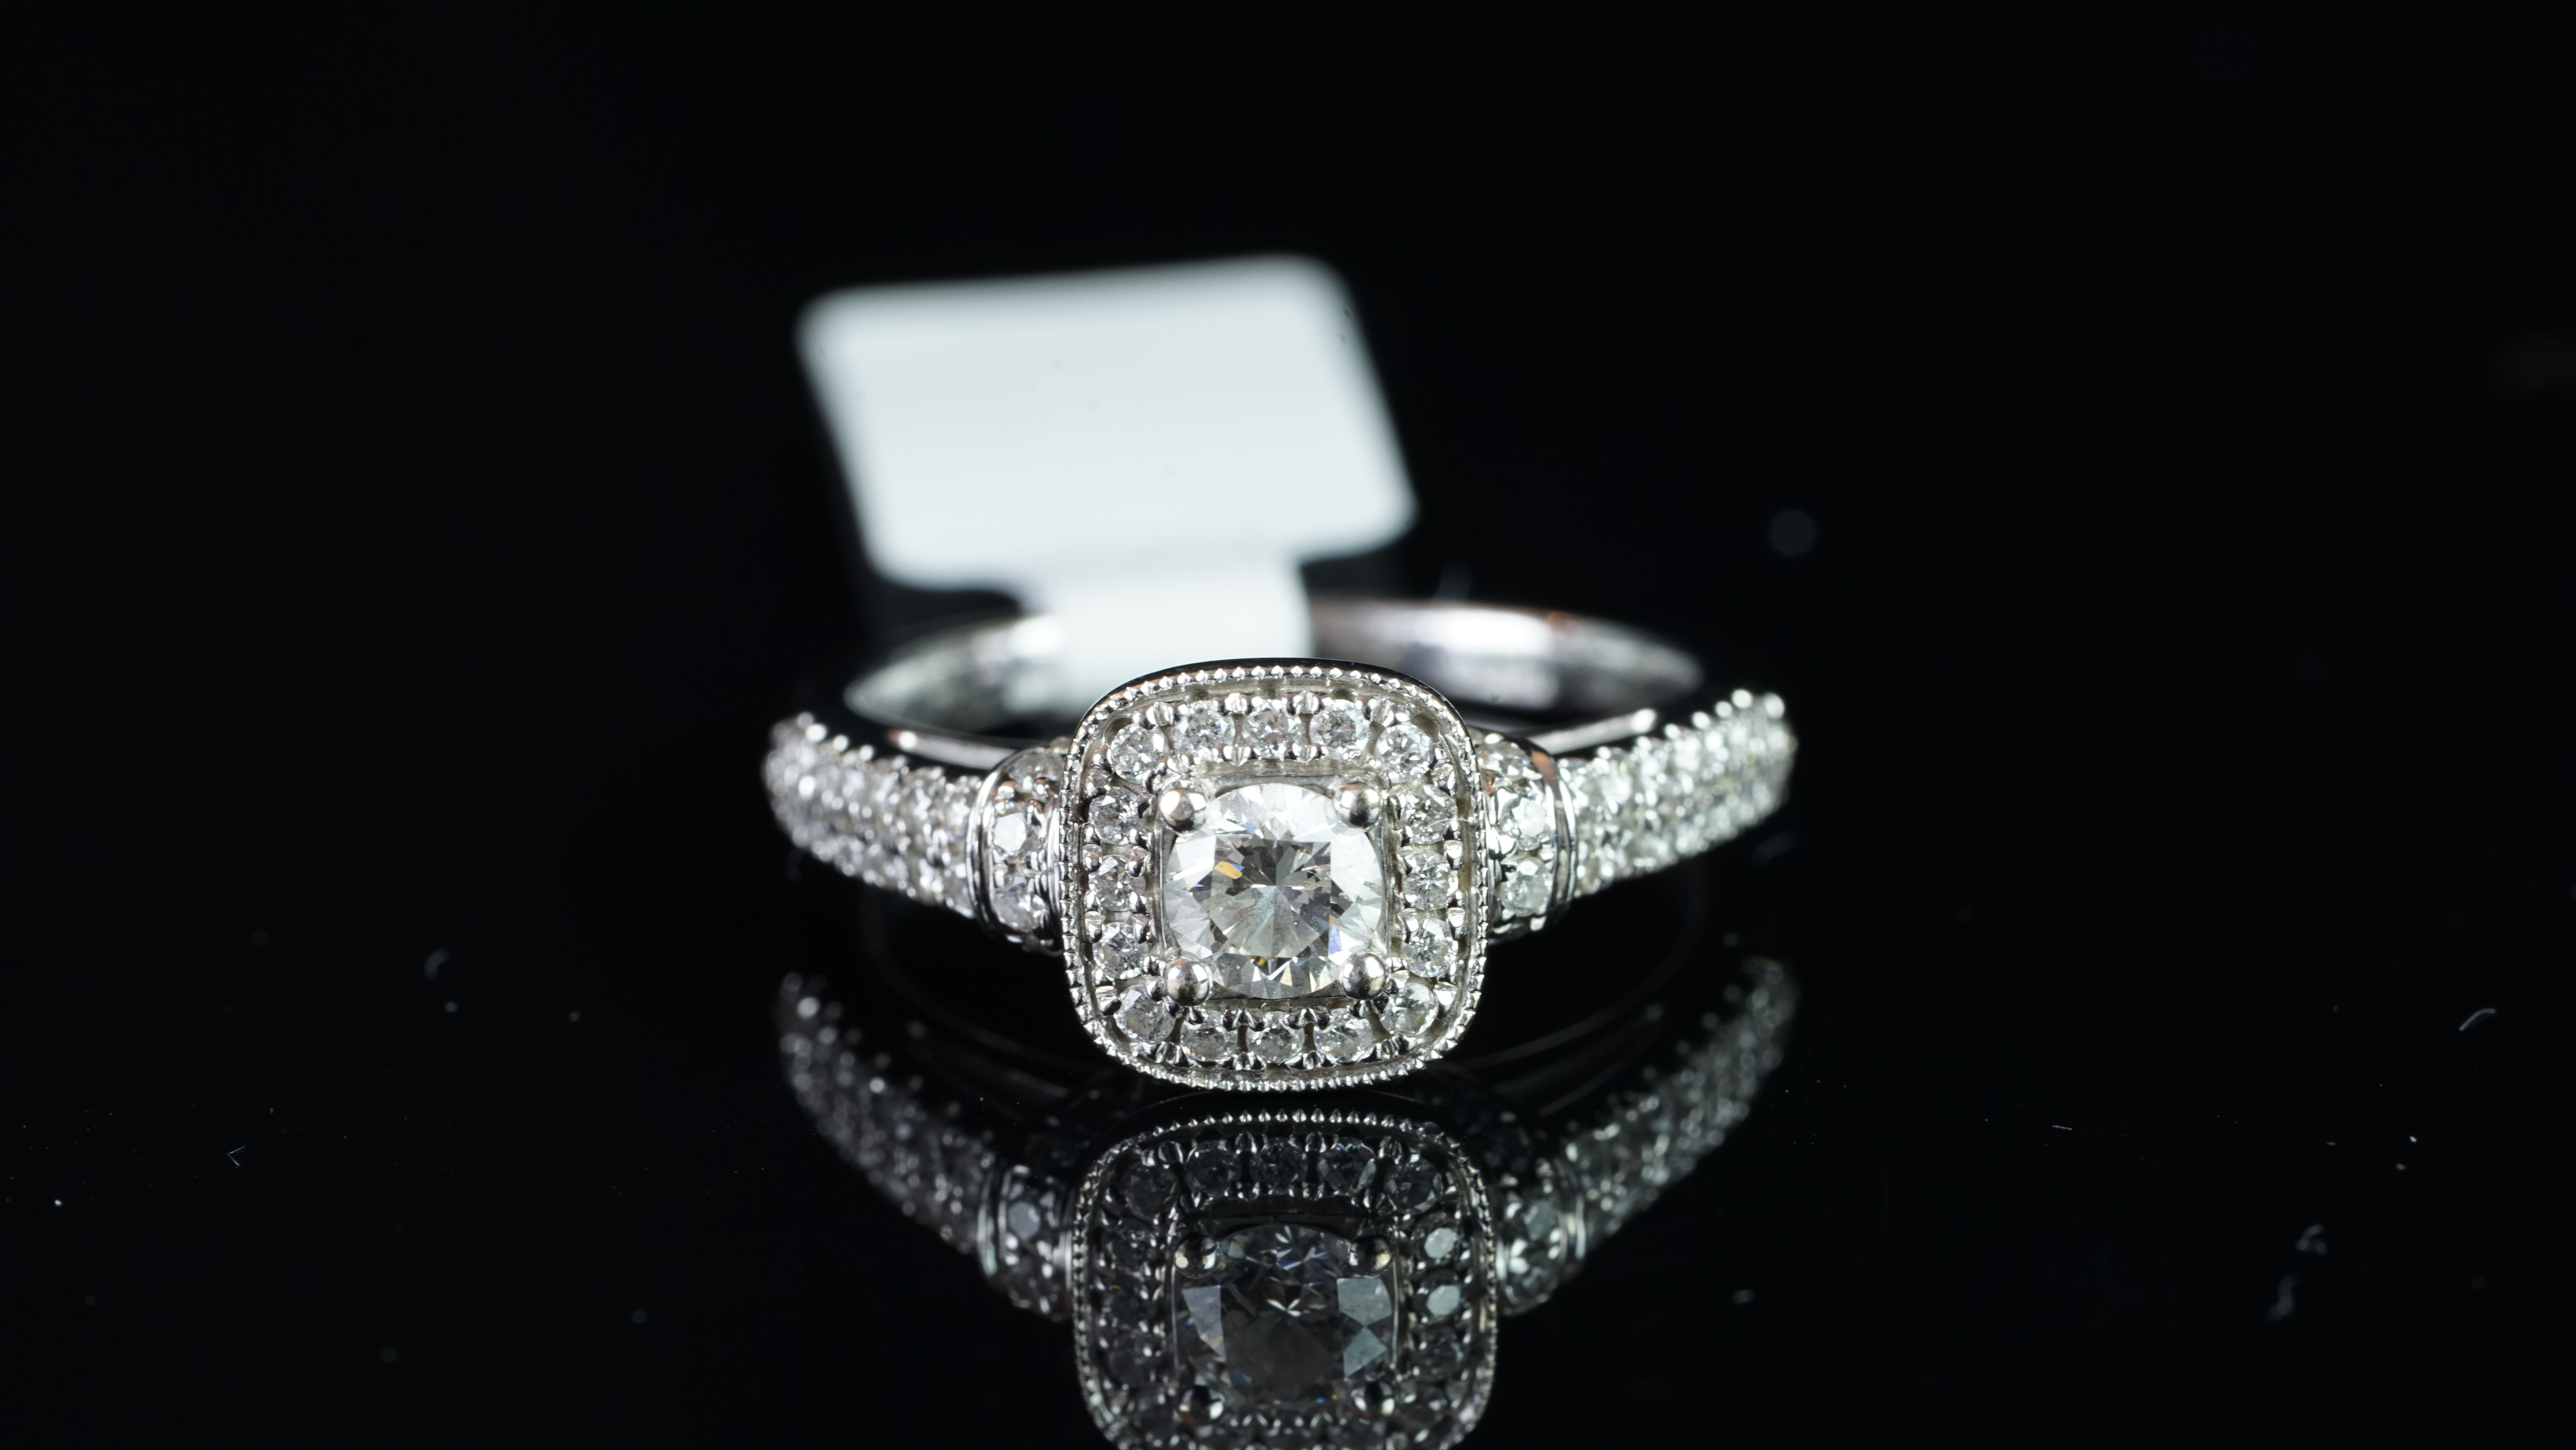 A diamond cluster ring by Vera Wang, from the 'Love' collection, set with round brilliant cut